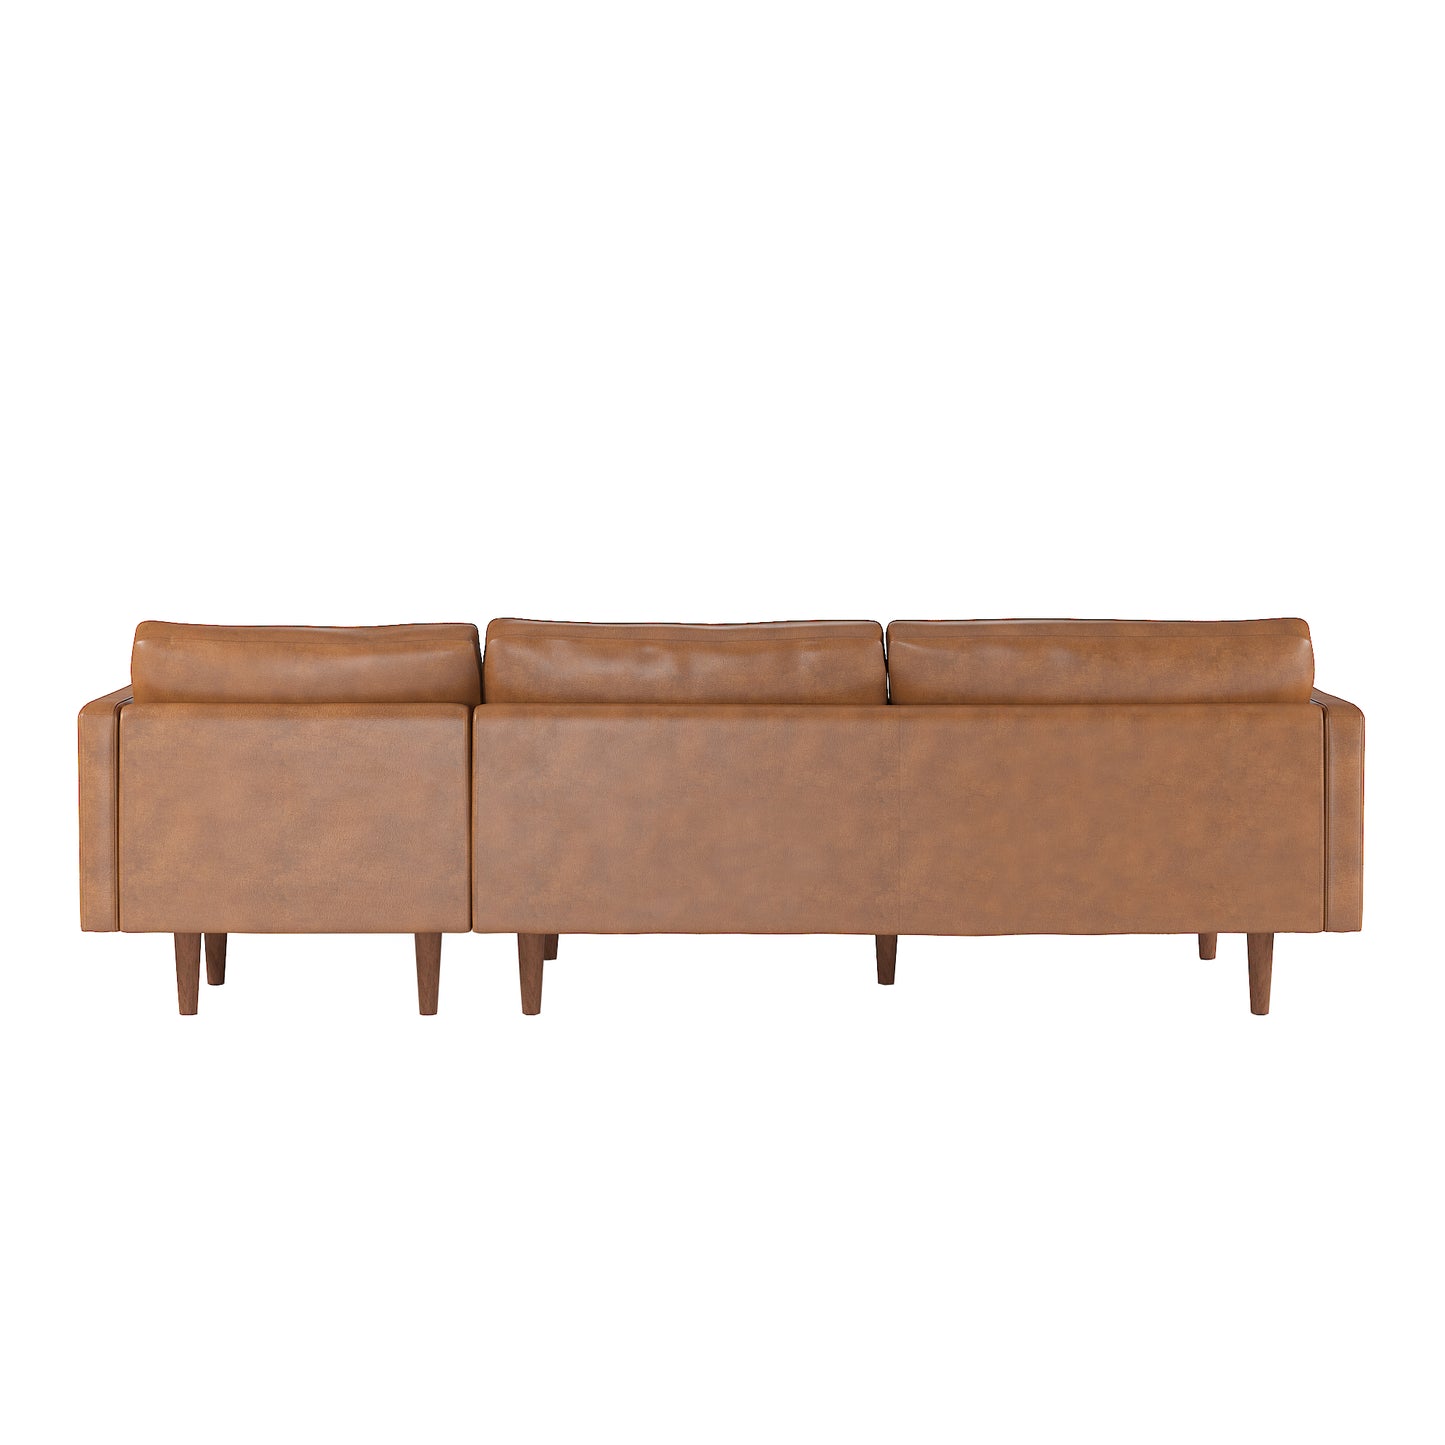 Mid-Century Faux Leather Sectional Sofa - Caramel, Right-Facing Chaise, 3-Seat Sectional